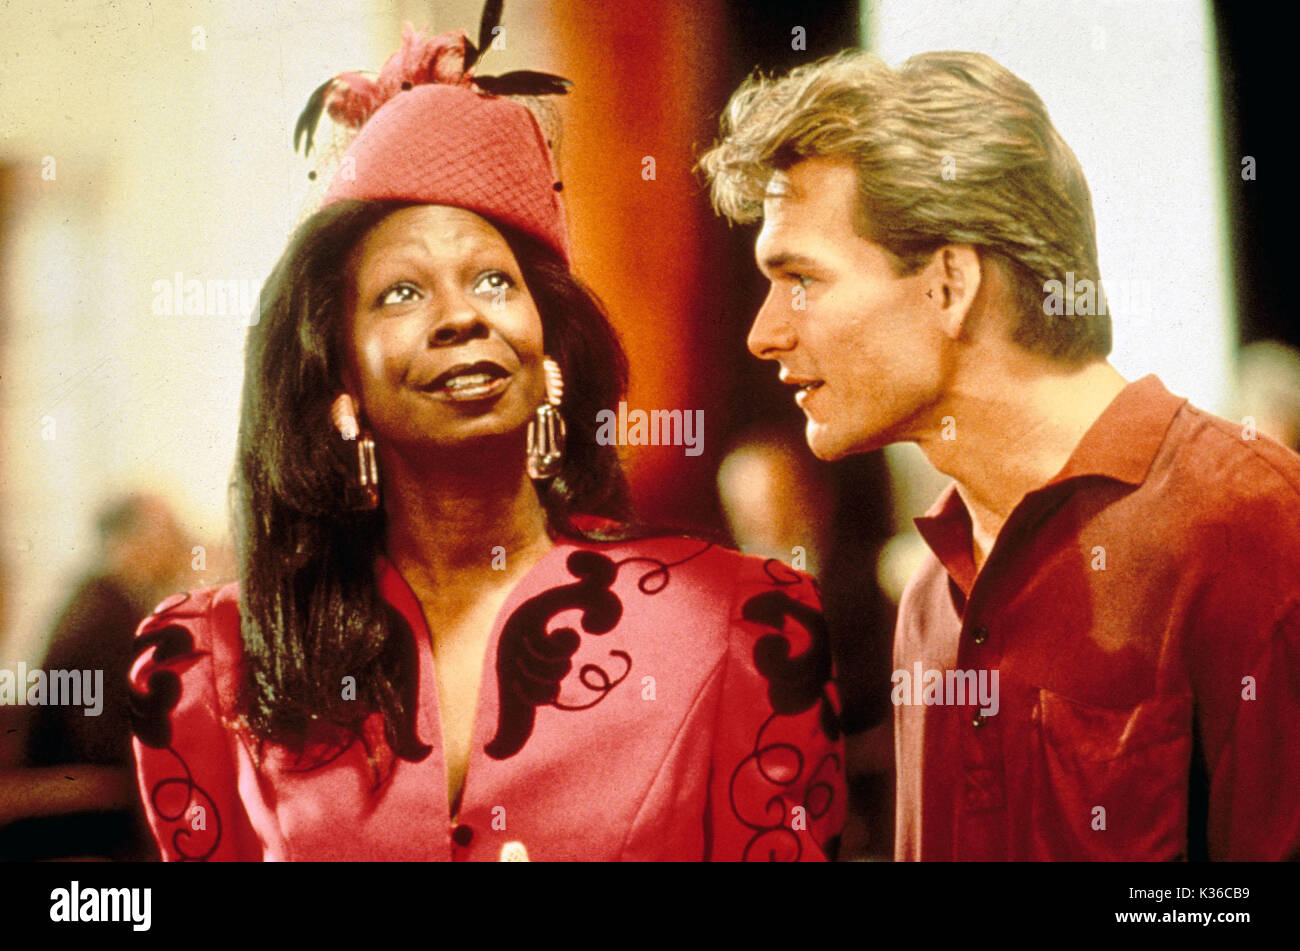 GHOST PARAMOUNT PICTURES WHOOPI GOLDBERG, PATRICK SWAYZE     Date: 1990 Stock Photo